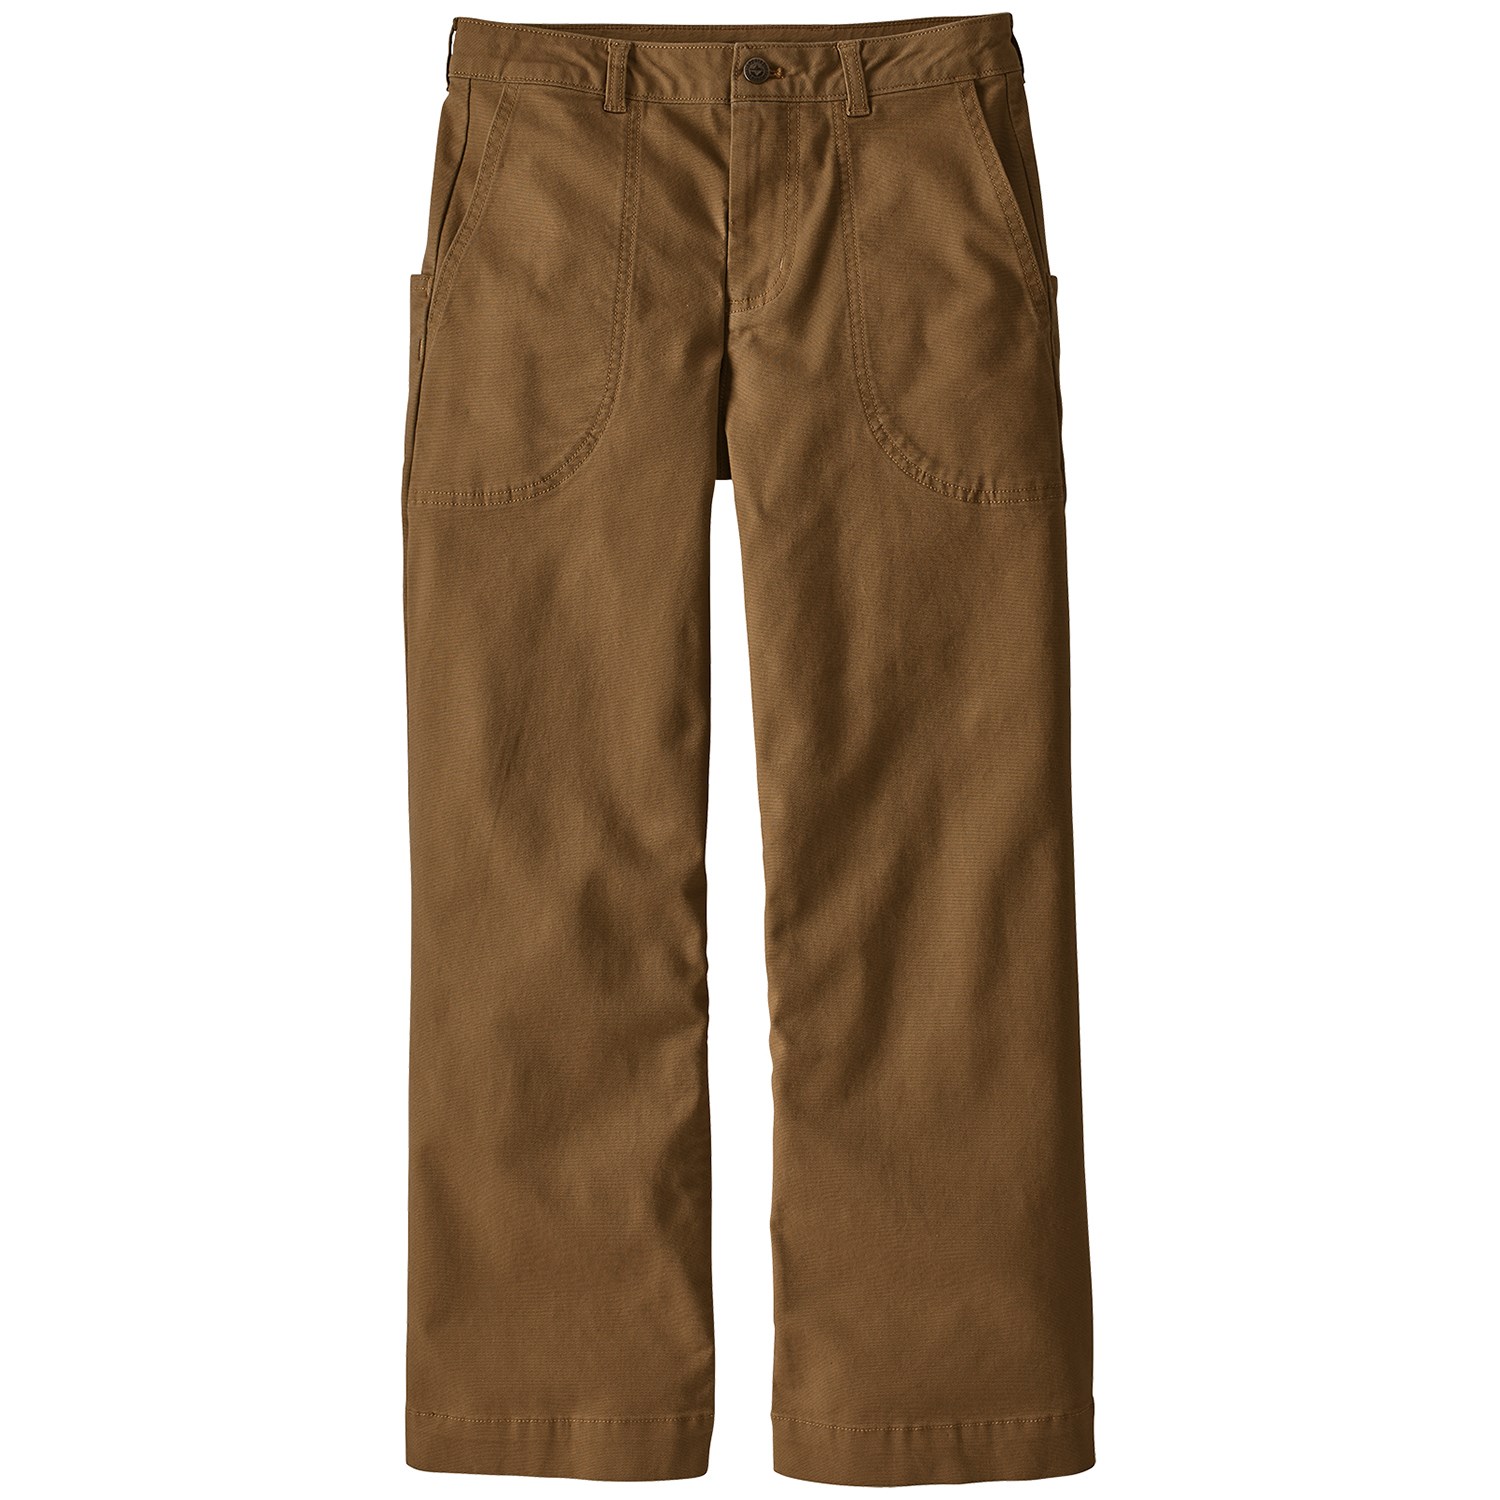 Patagonia Stand Up Cropped Pants - Women's | evo